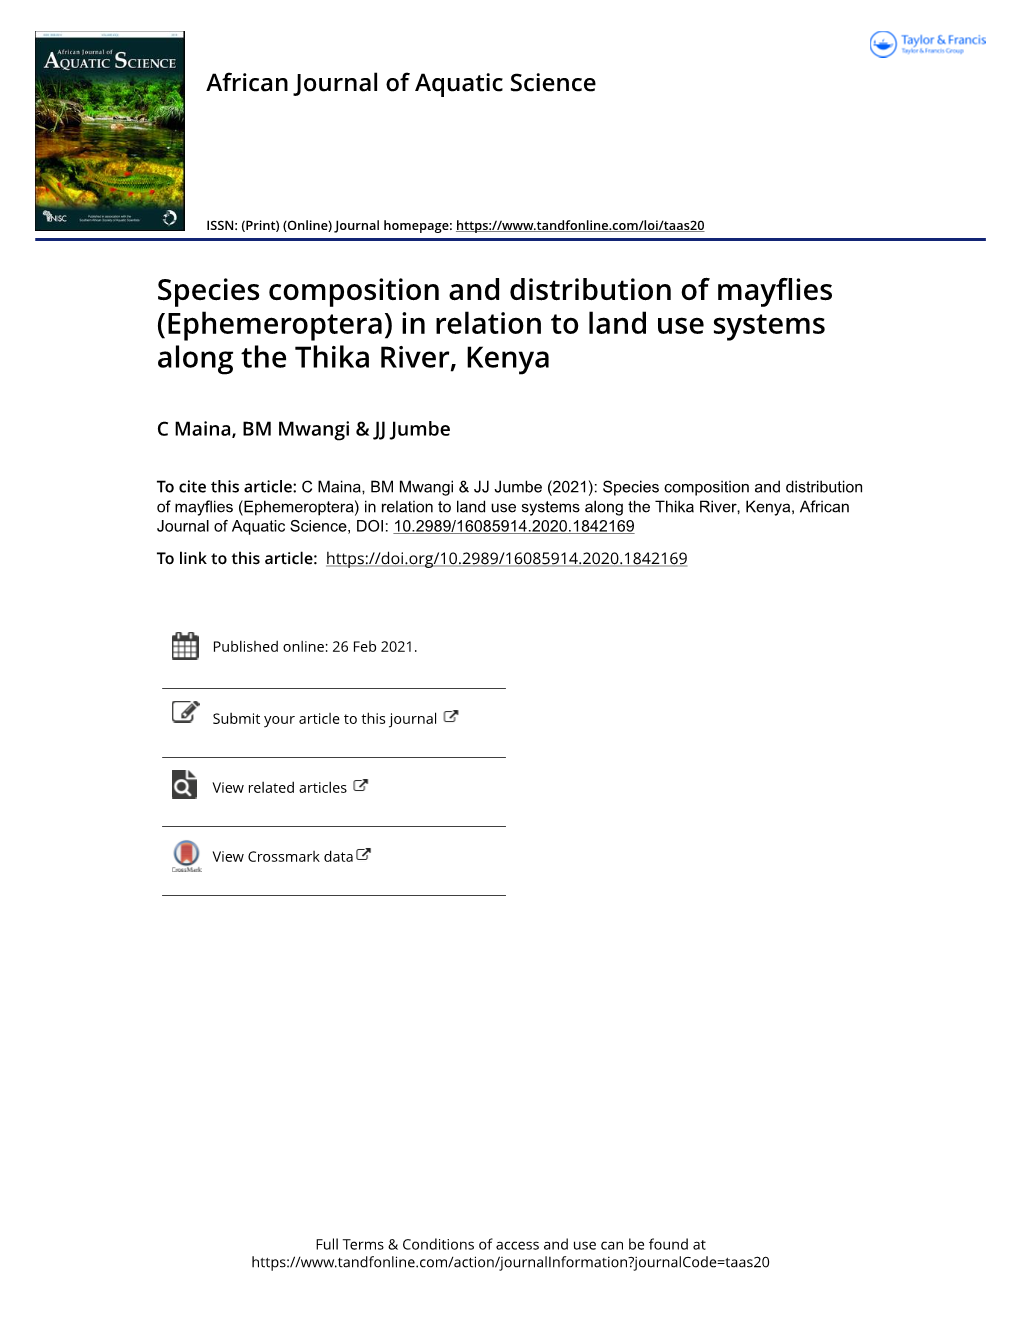 Species Composition and Distribution of Mayflies (Ephemeroptera) in Relation to Land Use Systems Along the Thika River, Kenya